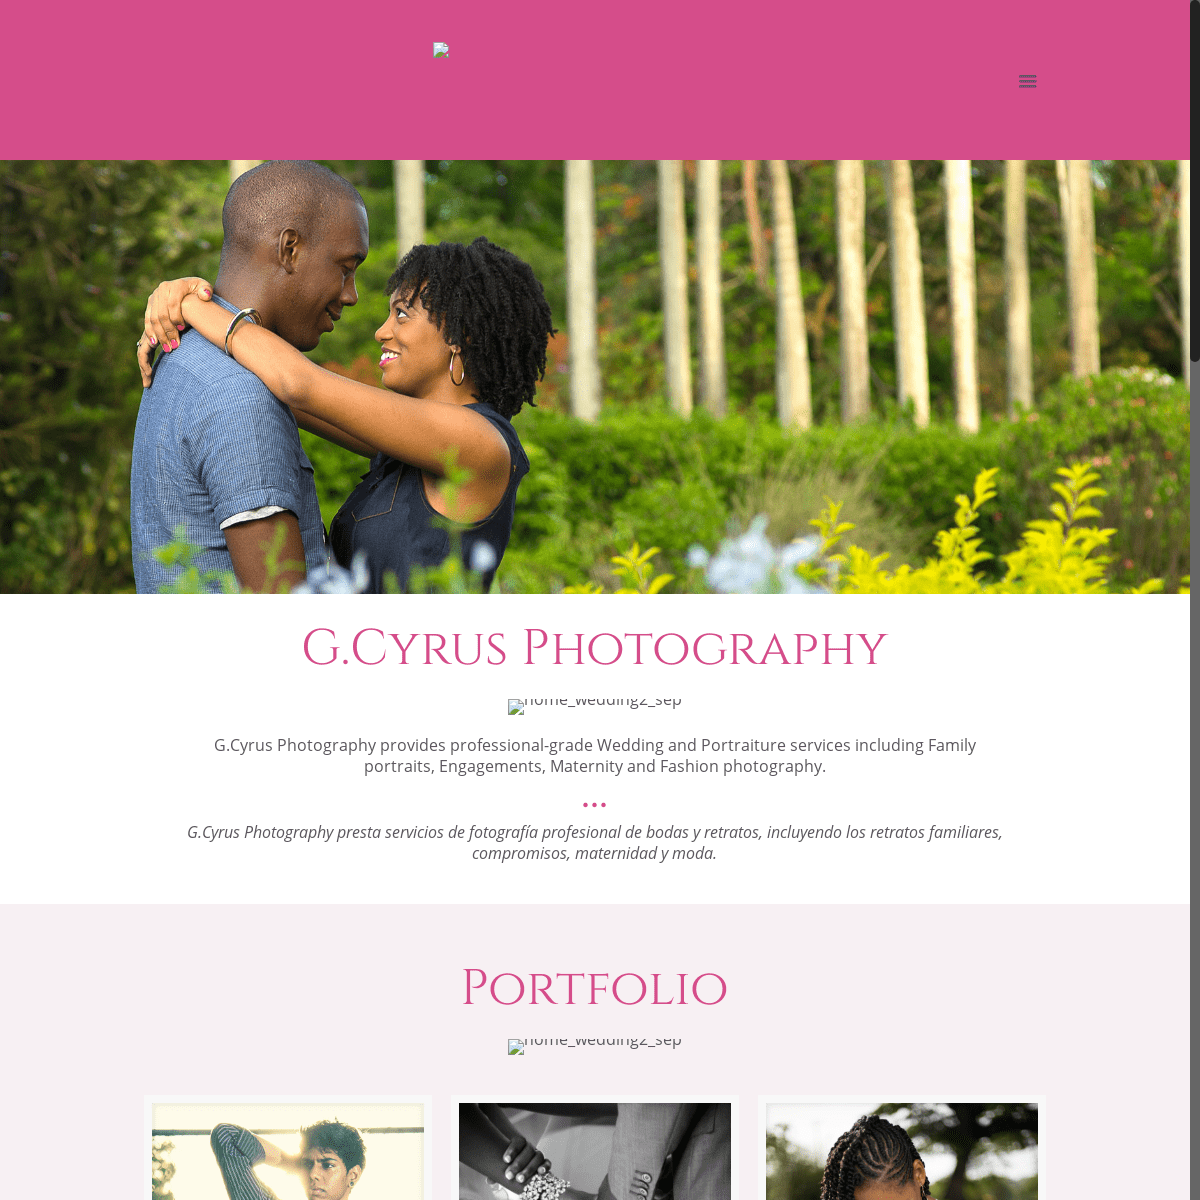 G. Cyrus Photography – Wedding, Family portraits, Engagements, Maternity and Fashion photography